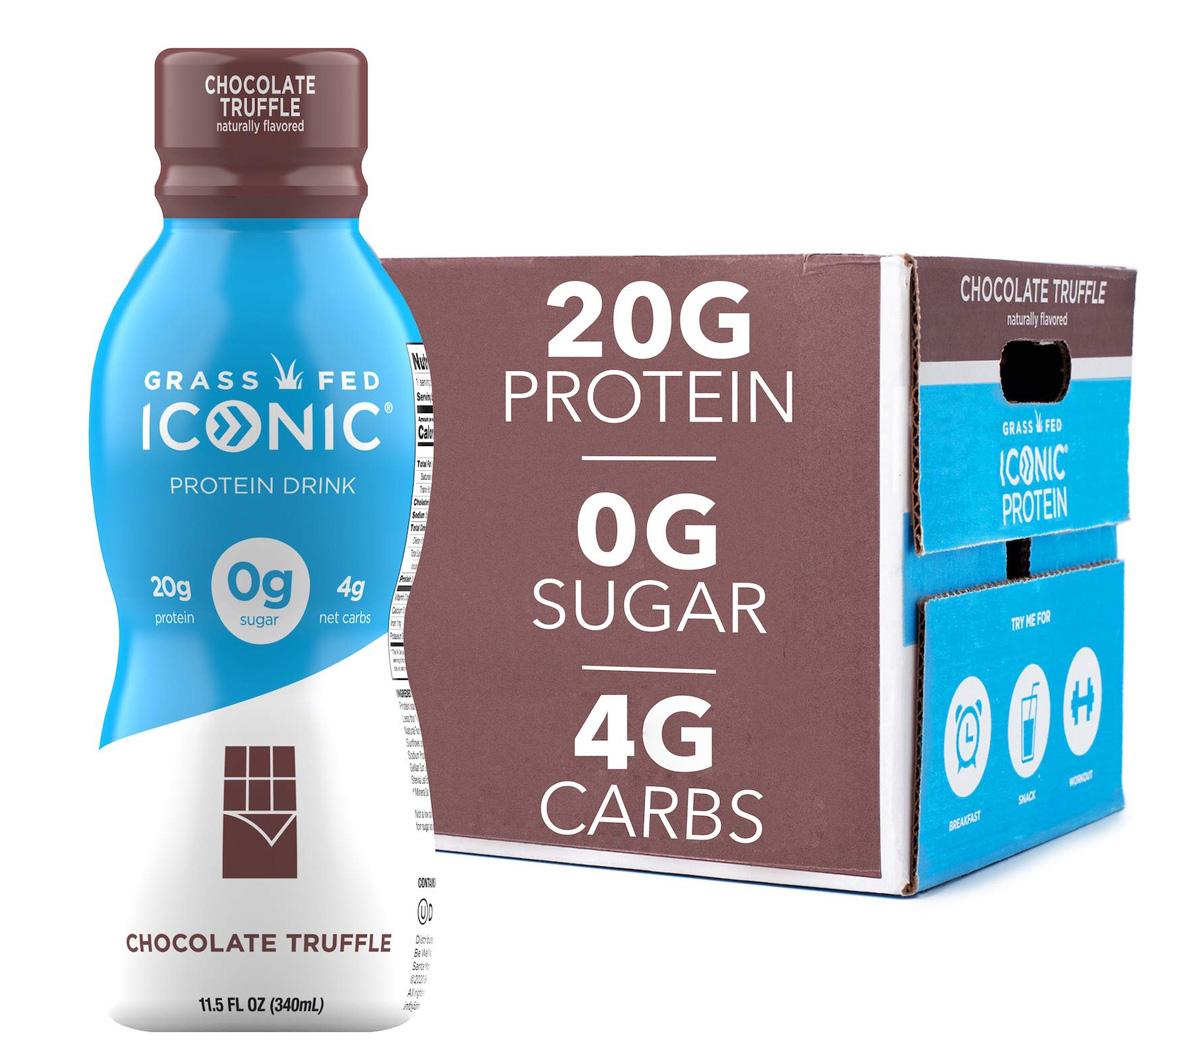 Iconic Protein Drink Chocolate Truffle 12 Pack for $9.99